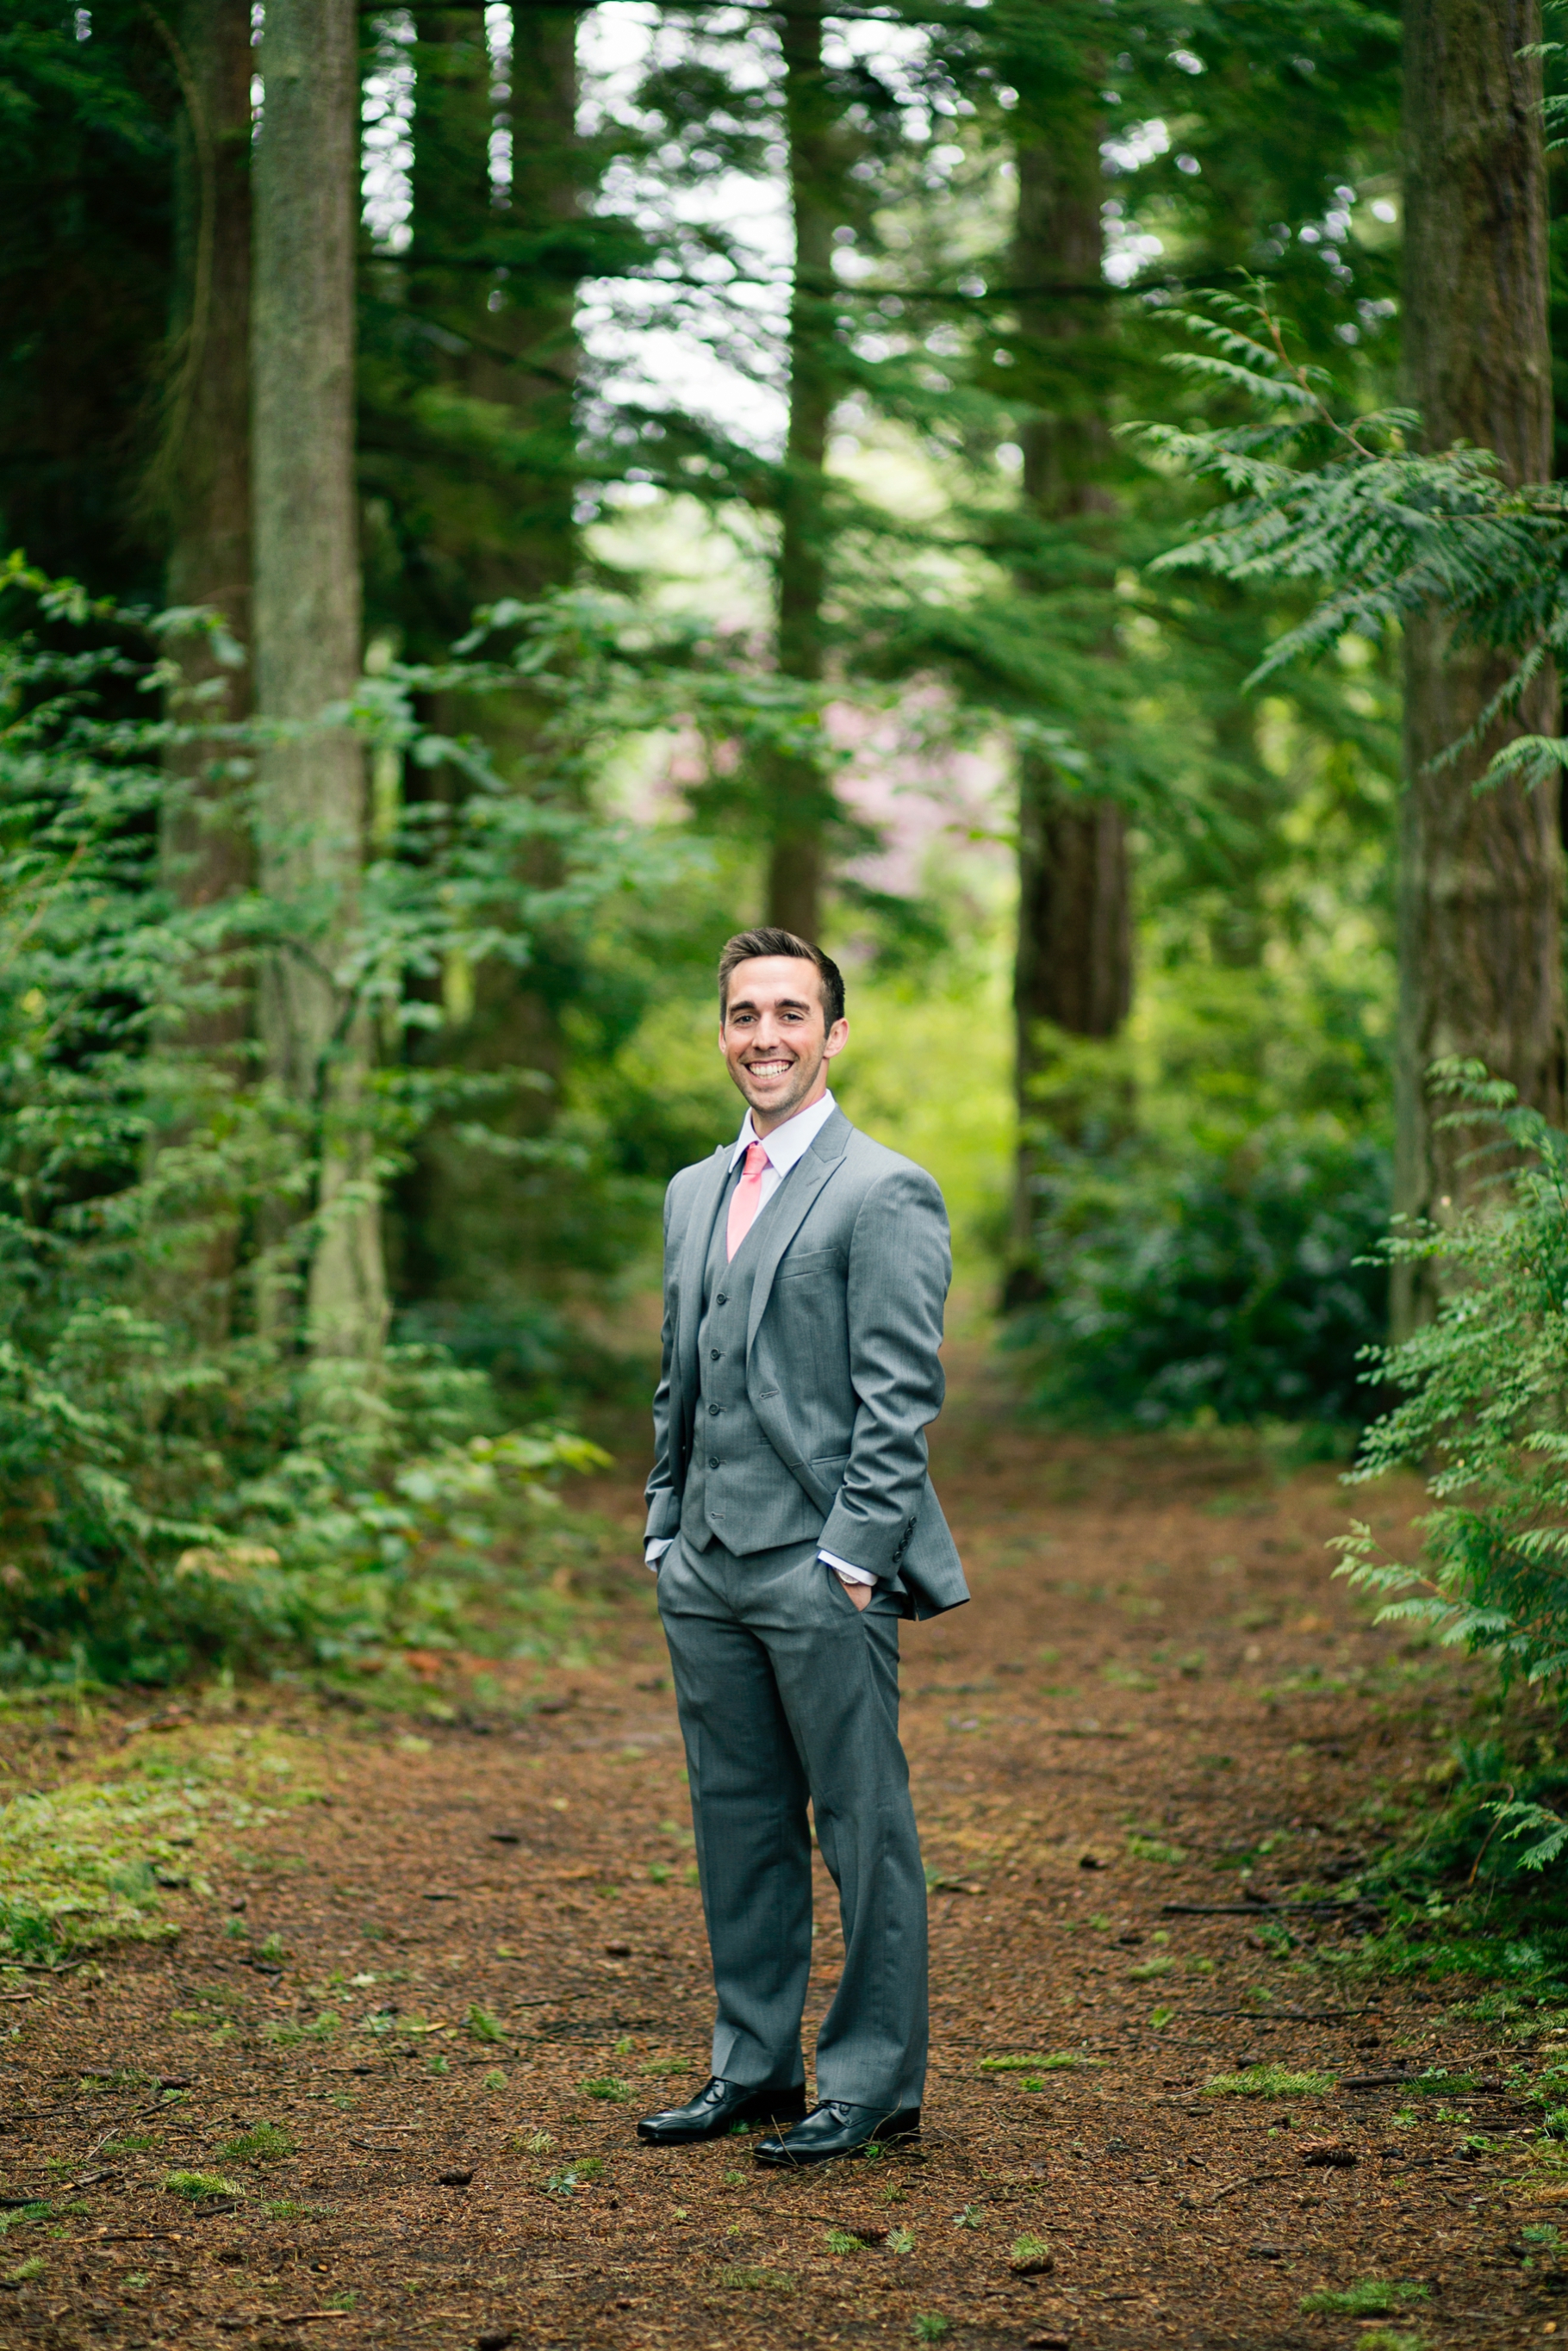 24-Groom-Groomsmen-Portraits-Grey-Suit-wooded-bluff-olympic-mountains-log-cabin-Kitsap-Memorial-State-Park-Forest-Northwest-Photographer-Seattle-Wedding-Photography-by-Betty-Elaine